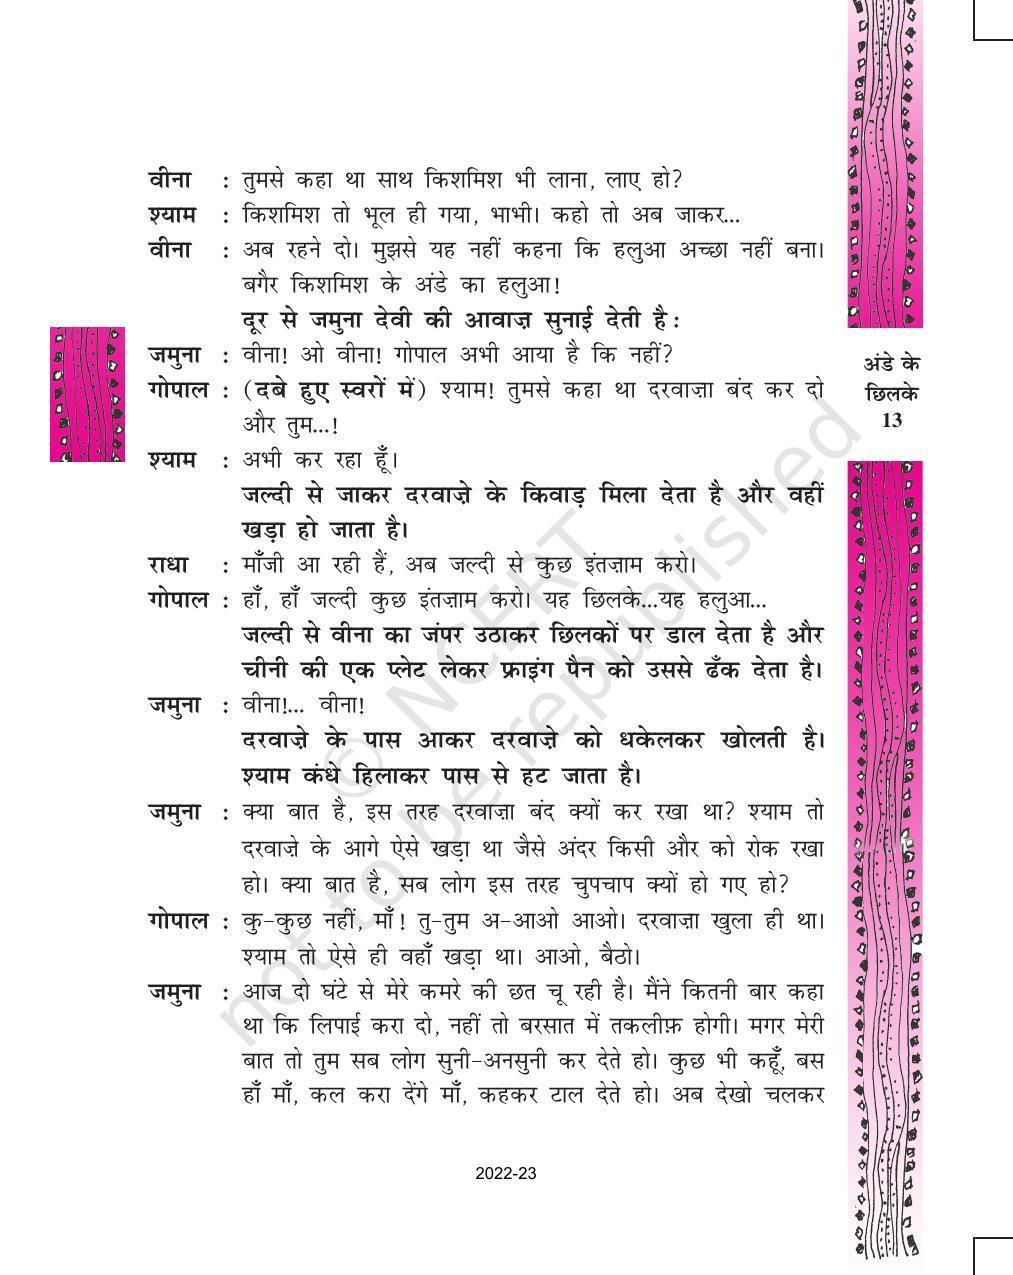 NCERT Book for Class 11 Hindi Antral Chapter 1 अंडे के छिलके - Page 13